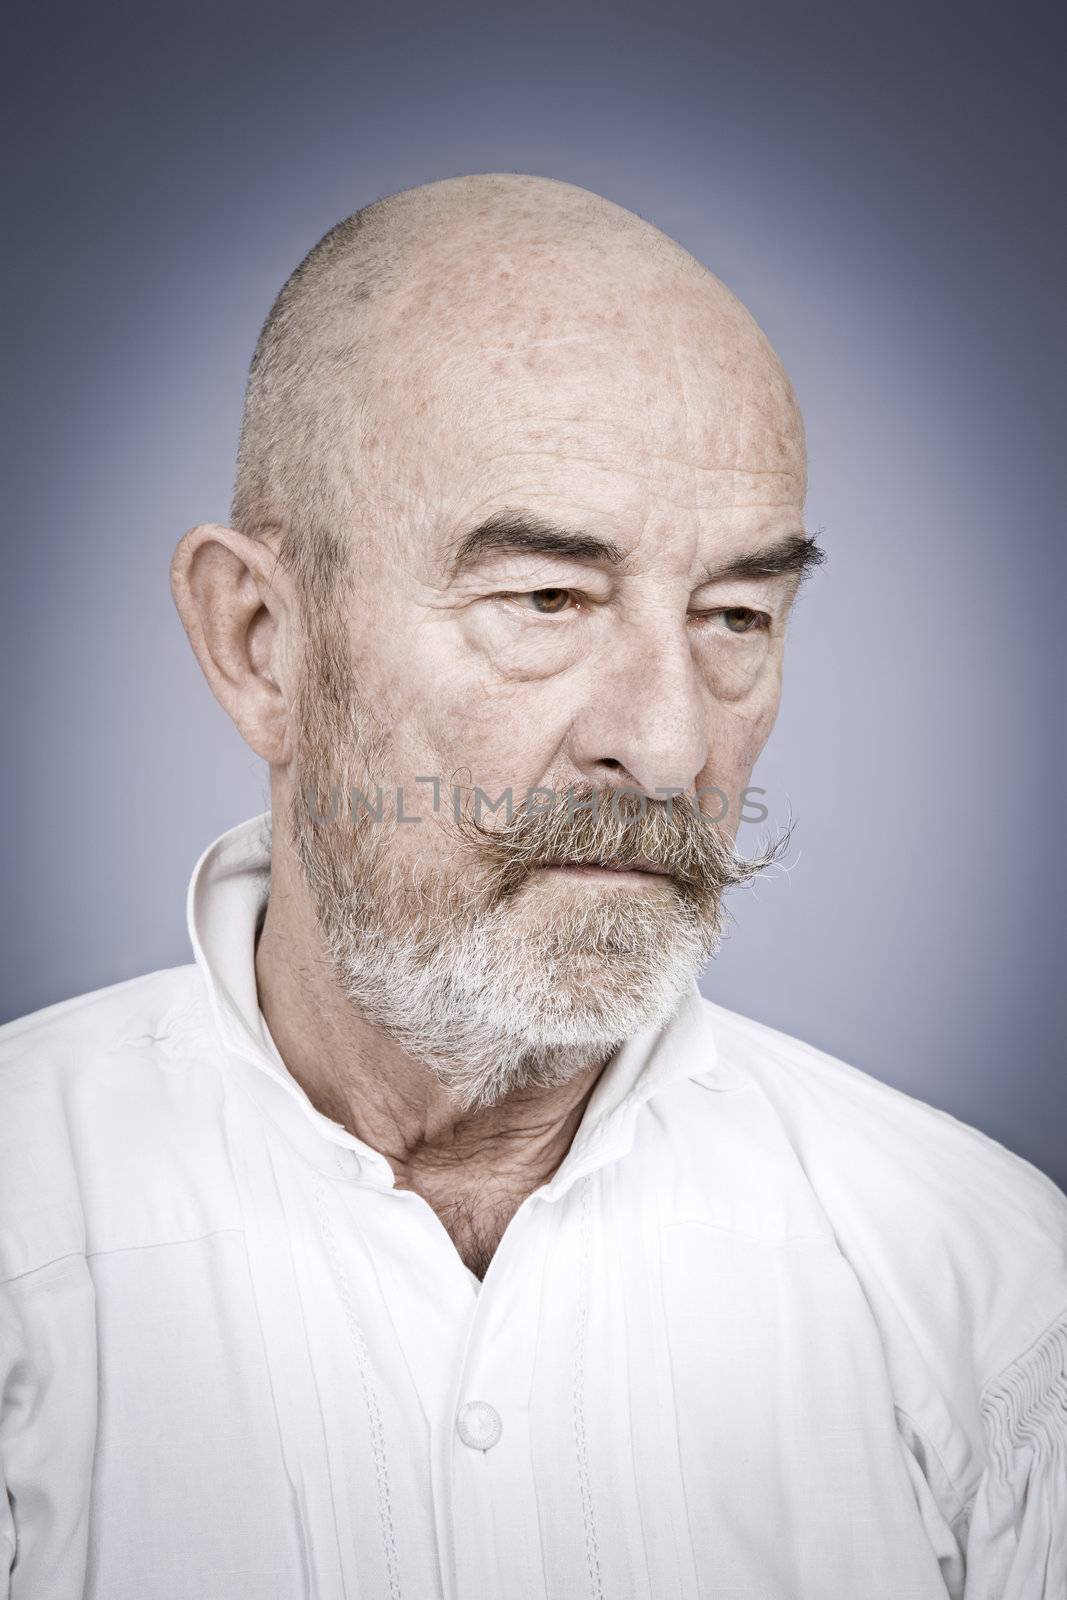 An old man with a grey beard is hopeless